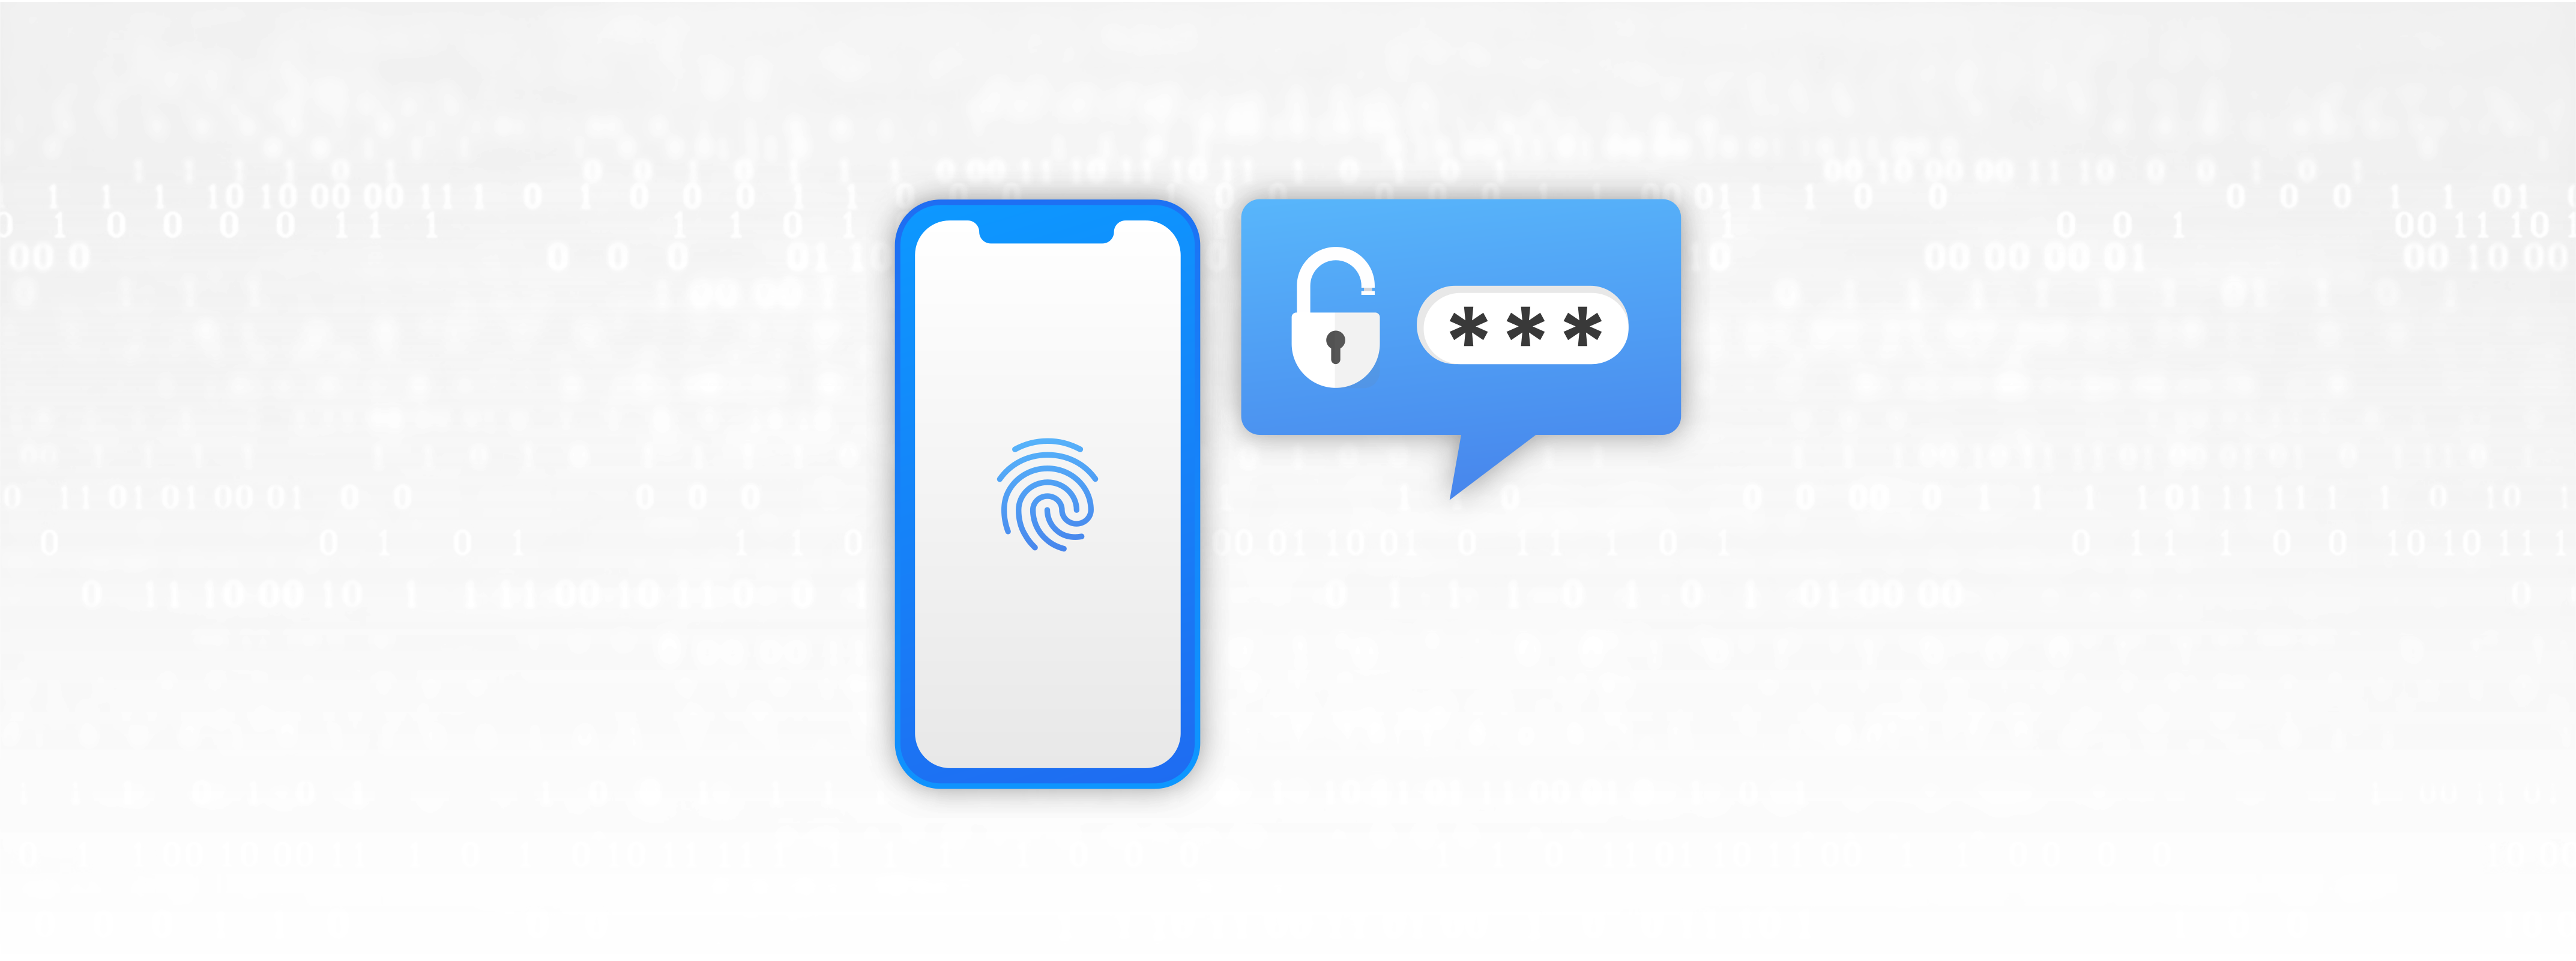 BlueMail Features Secure Lock Screen